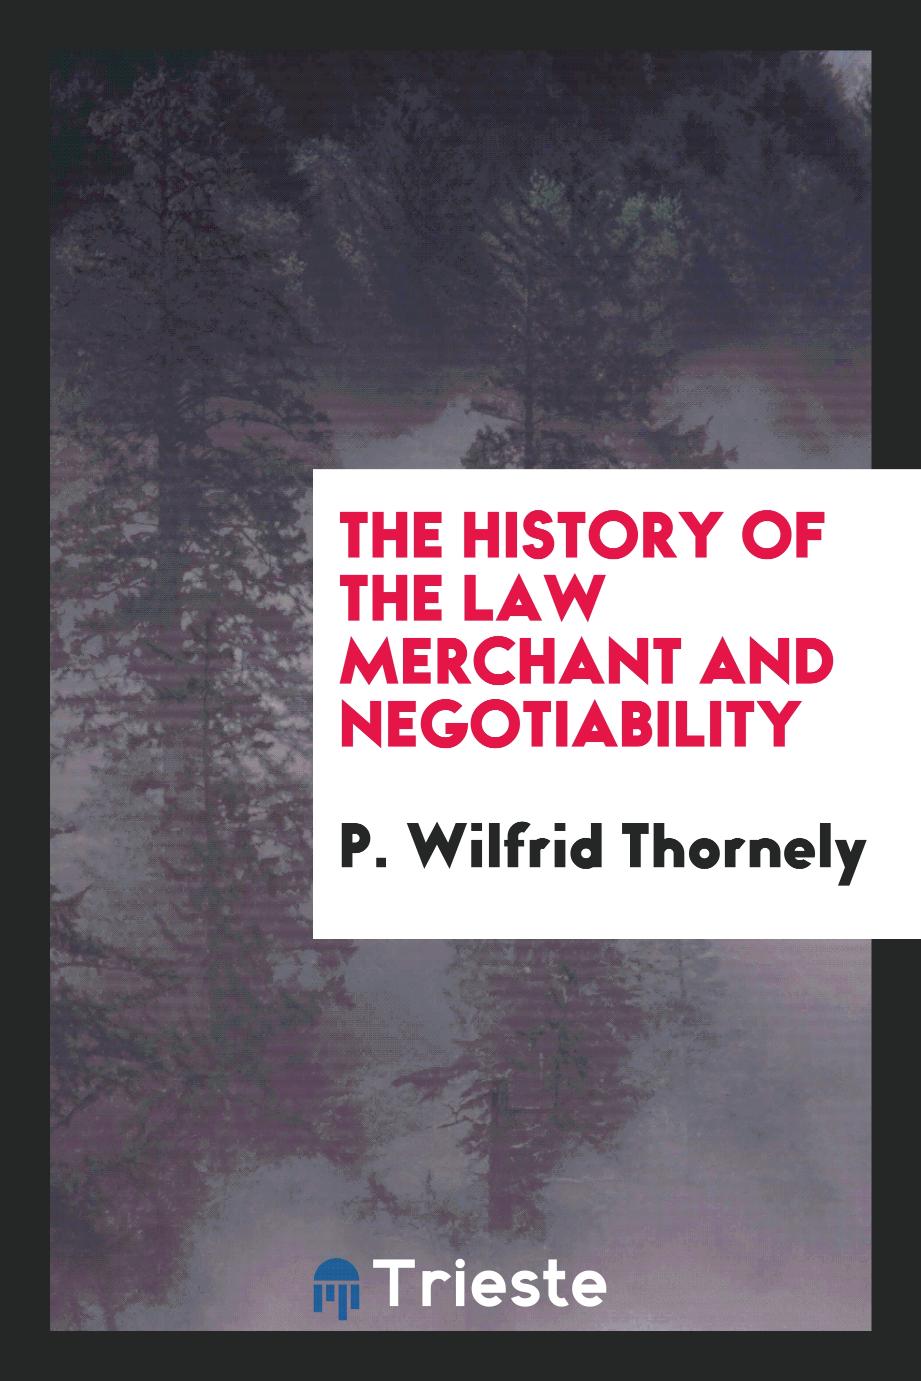 The history of the law merchant and negotiability